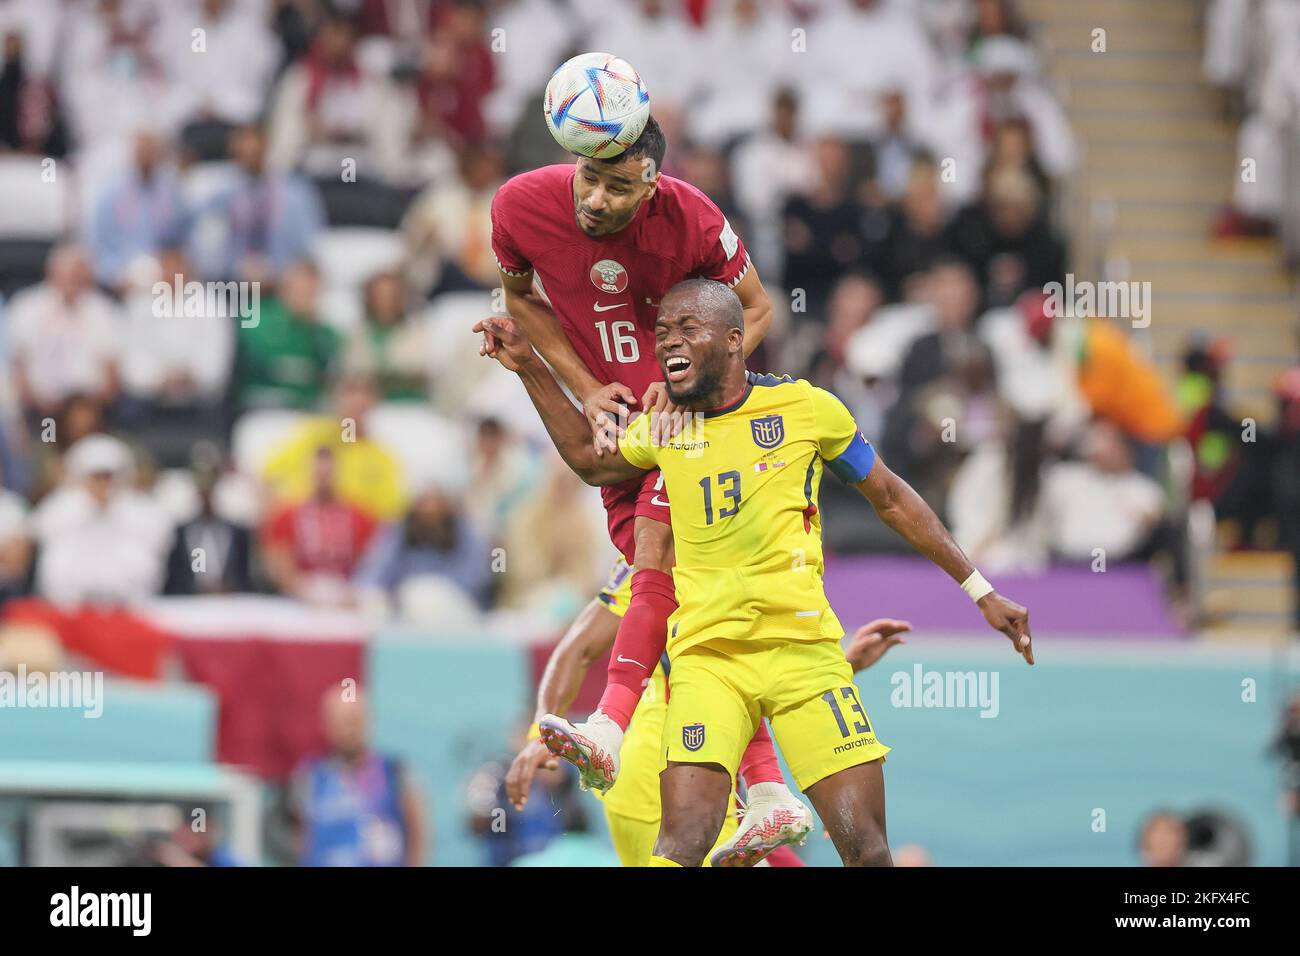 Al Khor, Qatar. 20th Nov, 2022. Qatar's Boualem Khoukhi and Ecuador's Enner Valencia fight for the ball during a soccer game between Qatar and Ecuador, the opening match of the 2022 FIFA World Cup soccer in Al Khor, State of Qatar on Sunday 20 November 2022. The World Cup is taking place from 20 November to 18 December. BELGA PHOTO BRUNO FAHY Credit: Belga News Agency/Alamy Live News Stock Photo